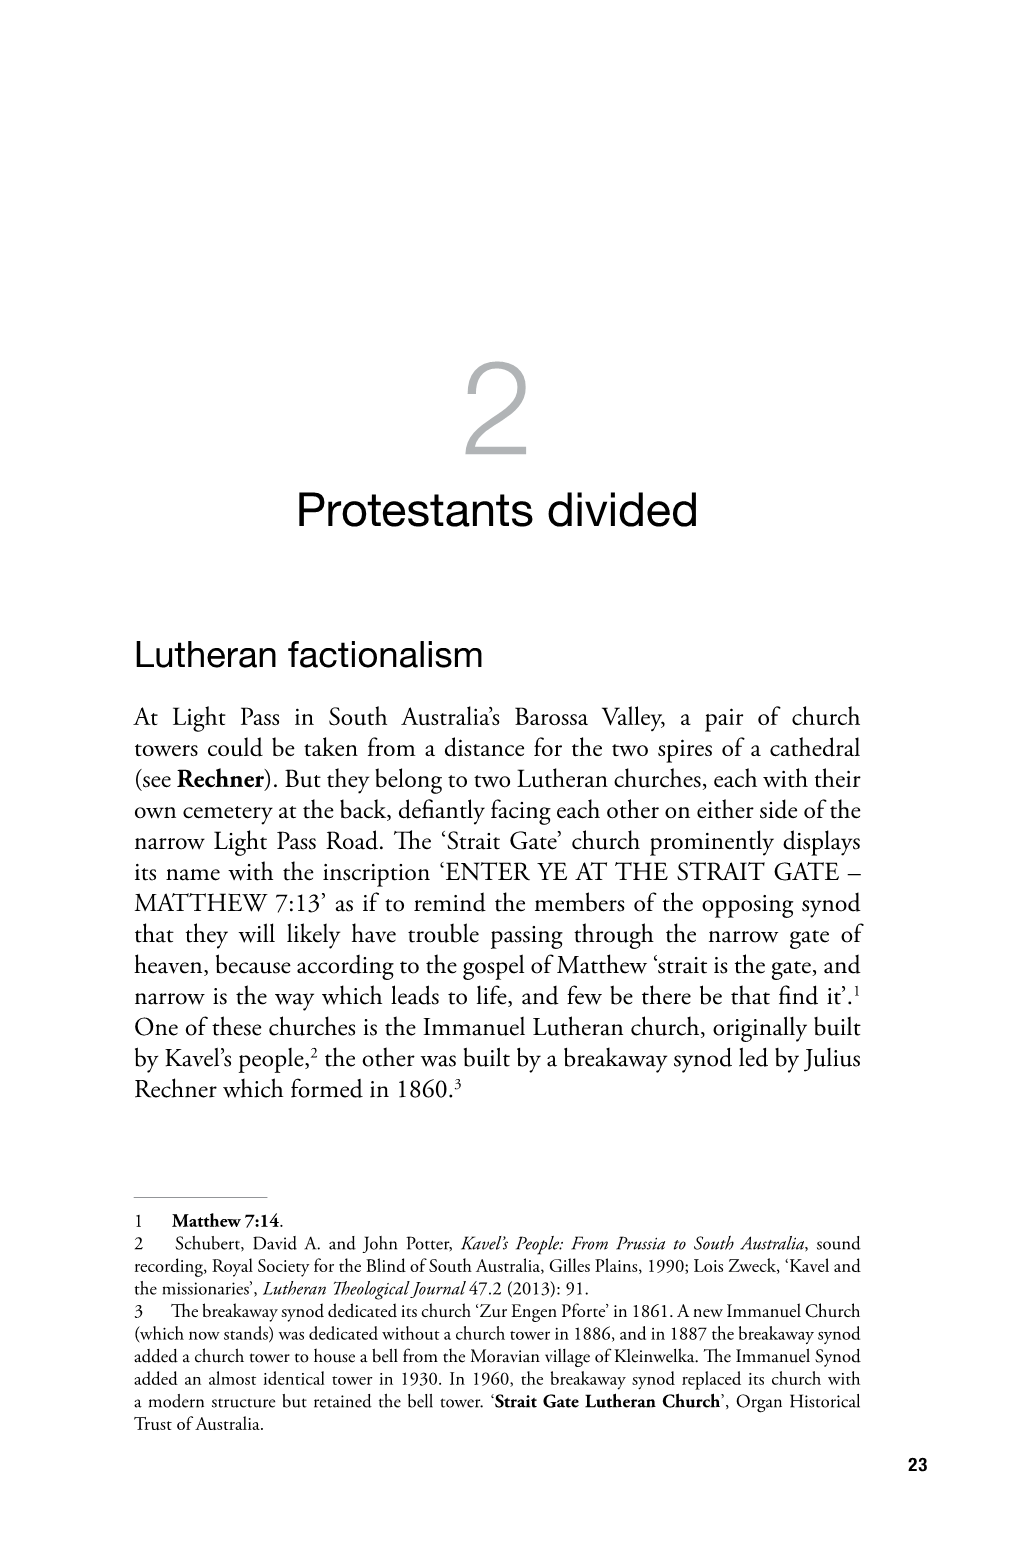 Protestants Divided